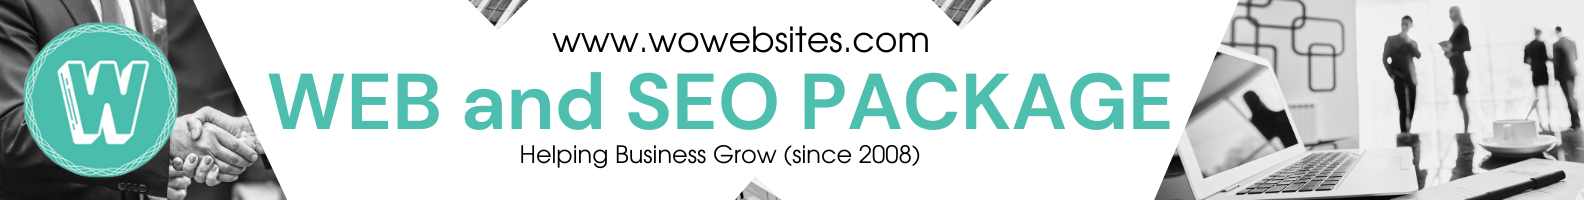 Web and SEO Package WOWebsites.com